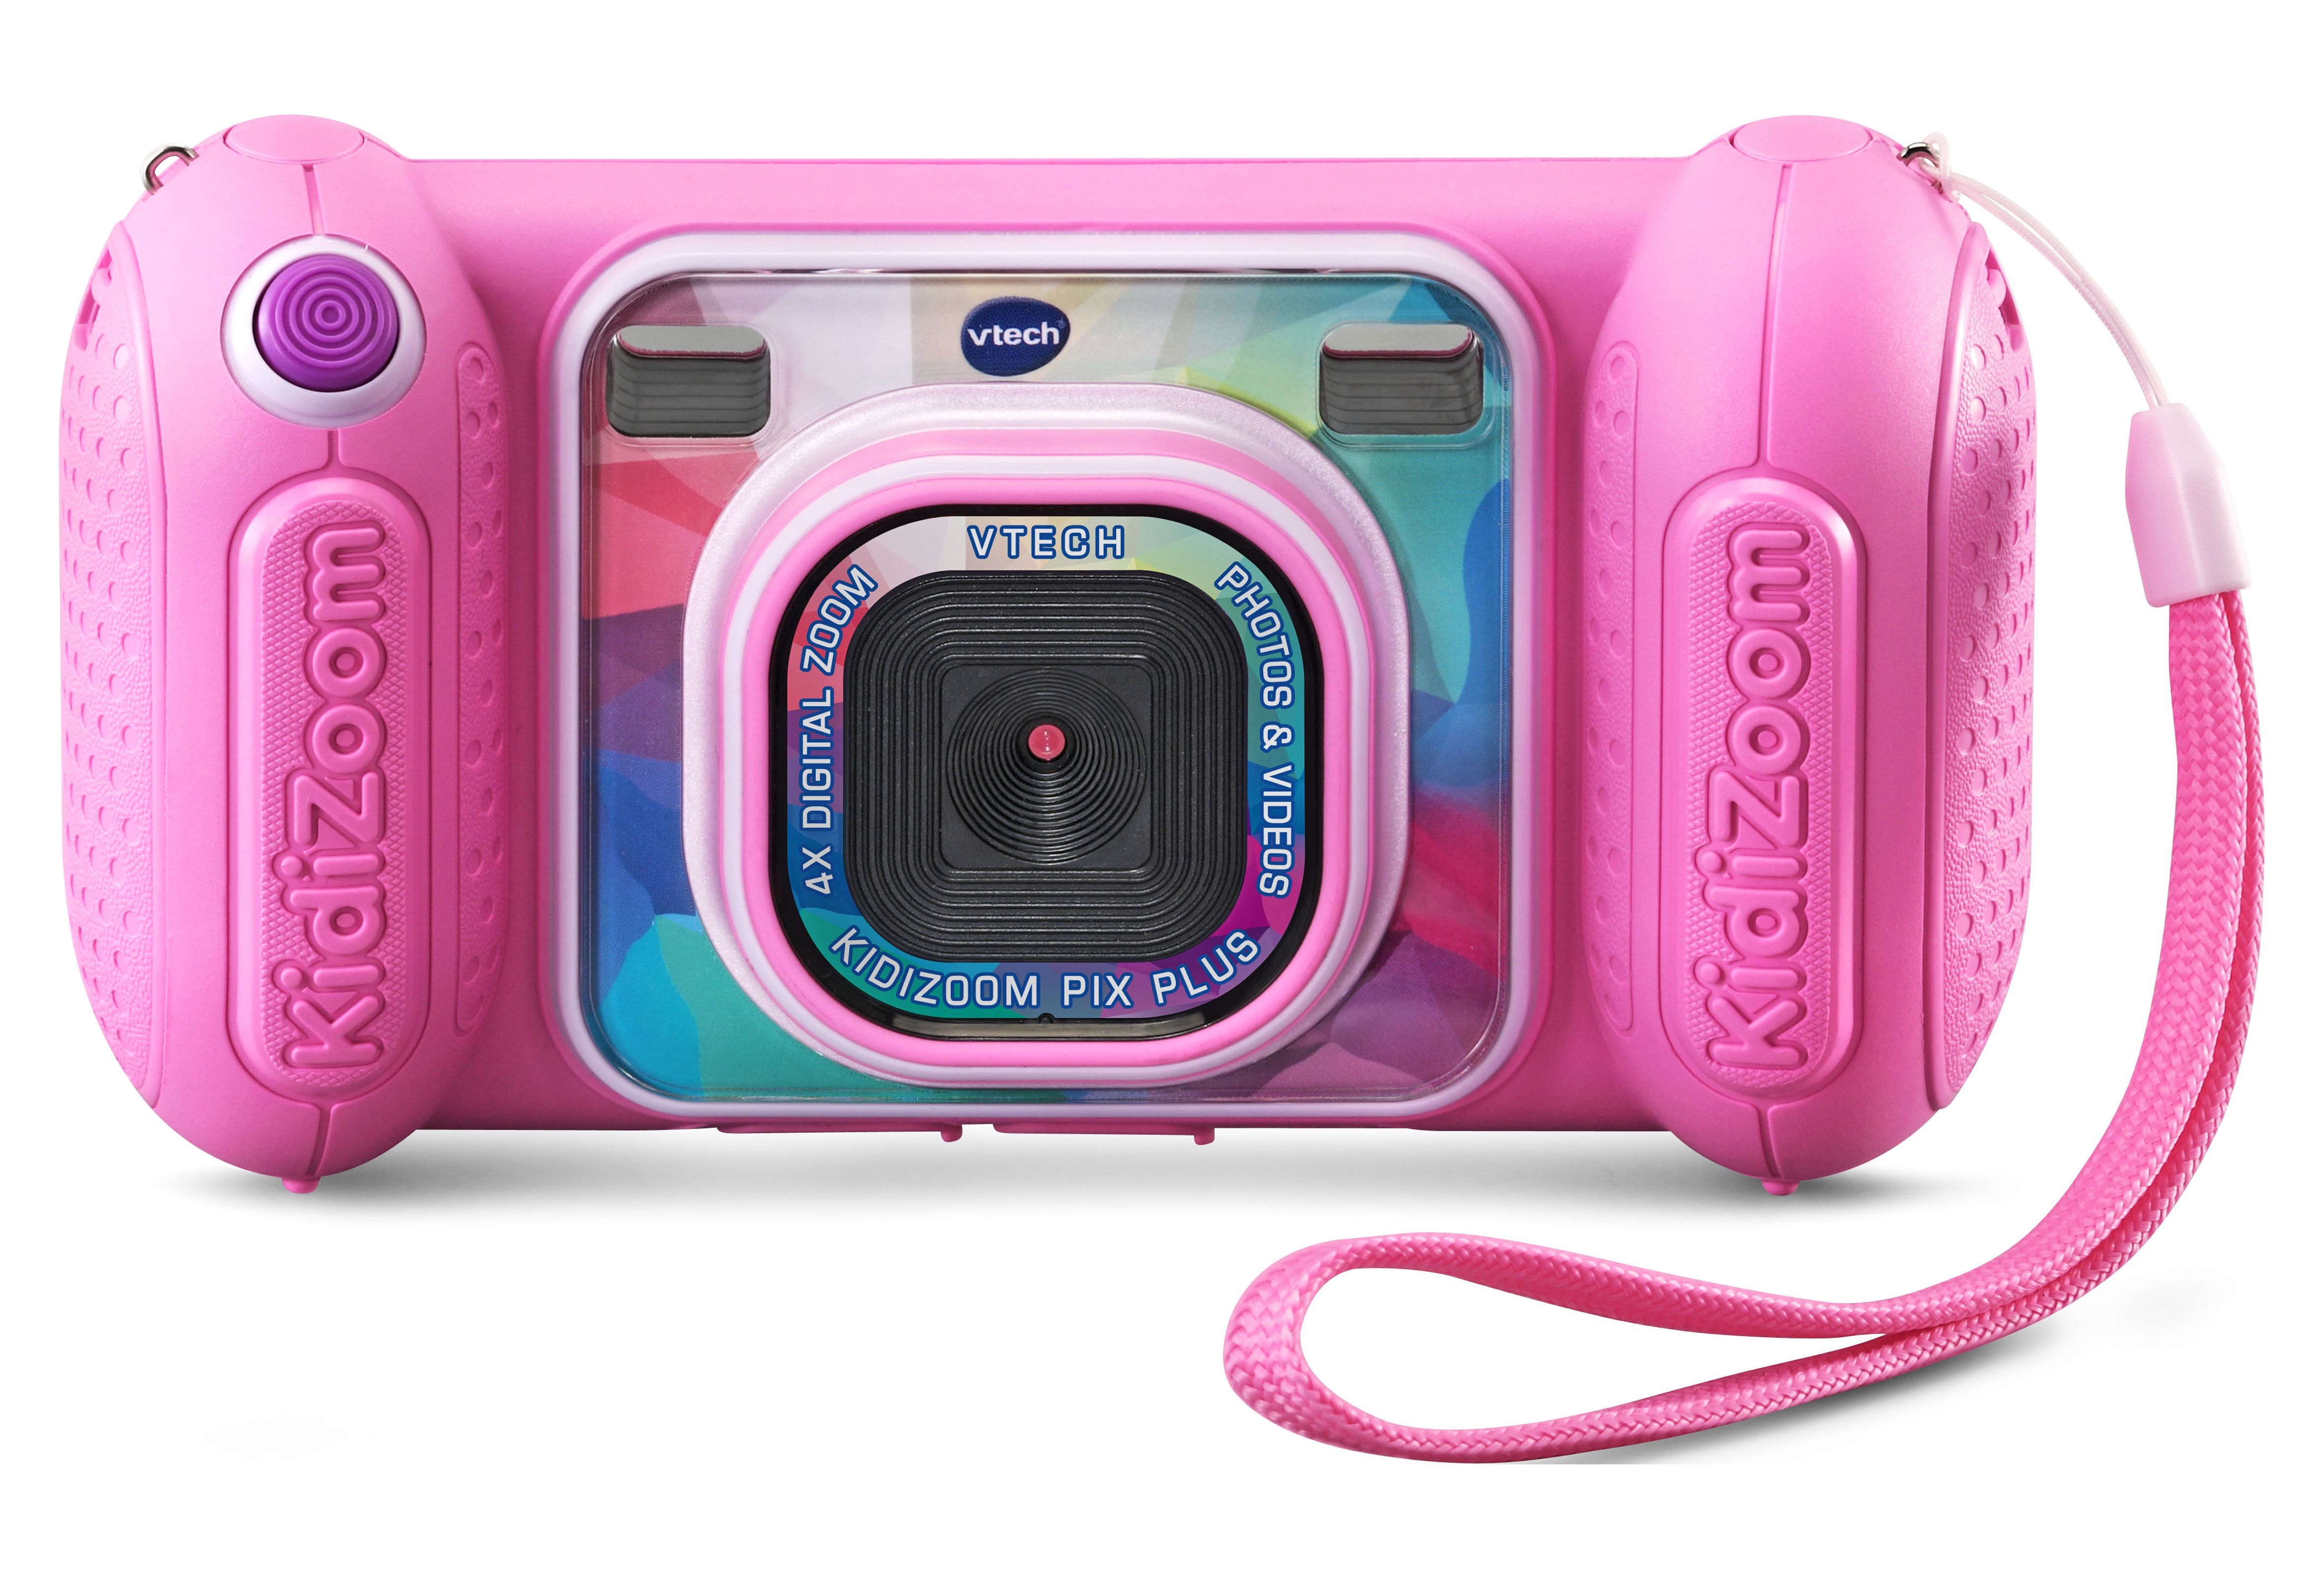 VTech KidiZoom Camera Pix Plus (Pink) with Panoramic and Talking Photos - image 1 of 19